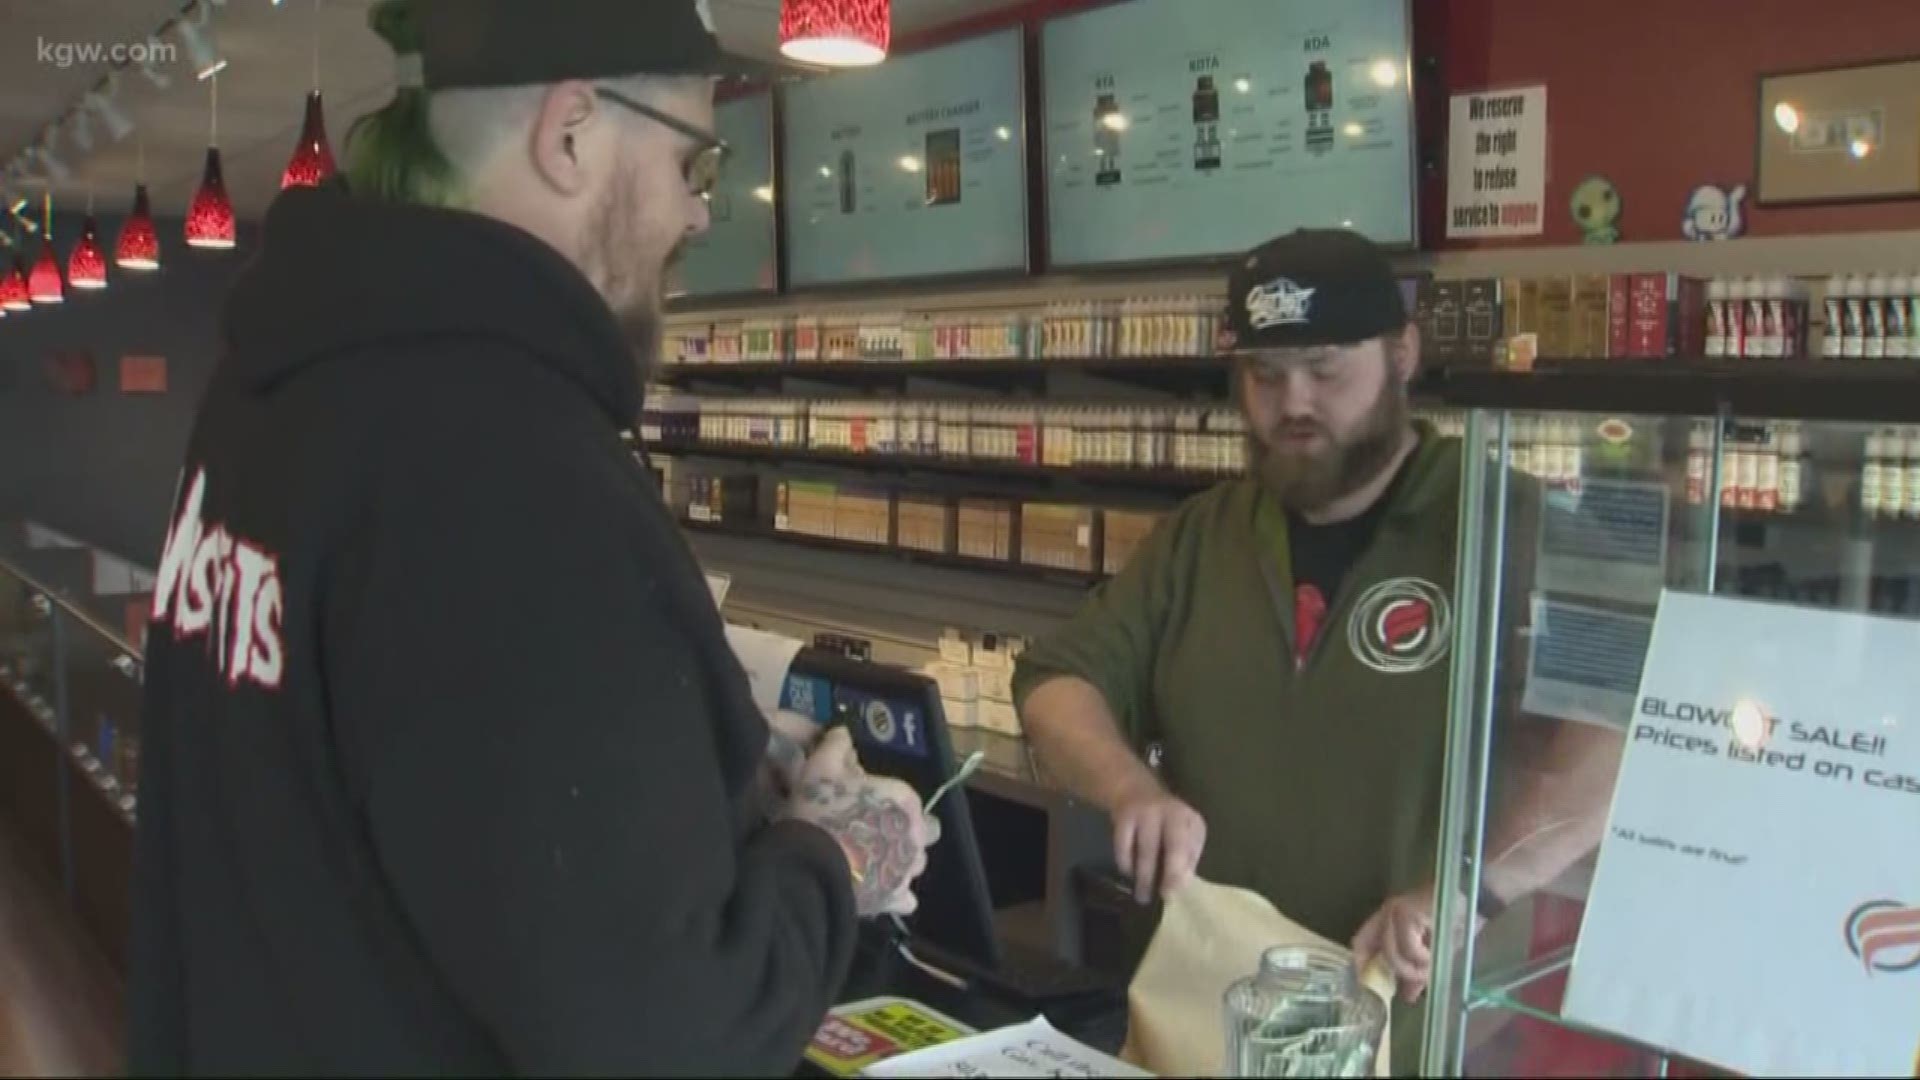 KGW’s Morgan Romero talked to people at a vape shop and dispensary in Gresham about gubernatorial executive orders banning all flavored vaping products in OR and WA